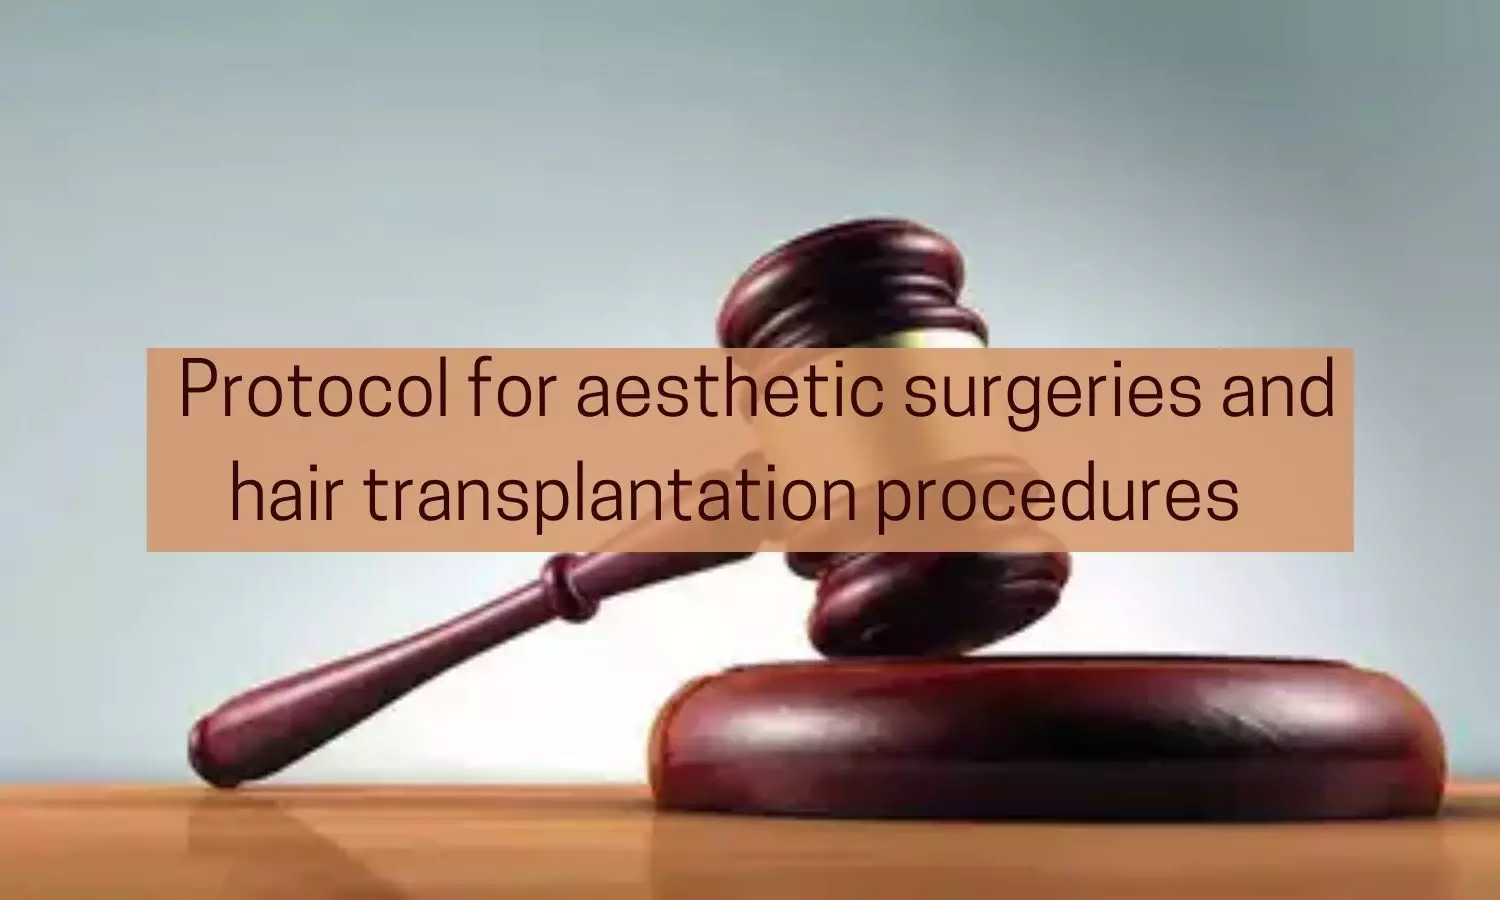 Mushrooming hair transplant centers: Court orders National Level Protocol for Doctors performing Hair Transplantation, Aesthetic Surgeries